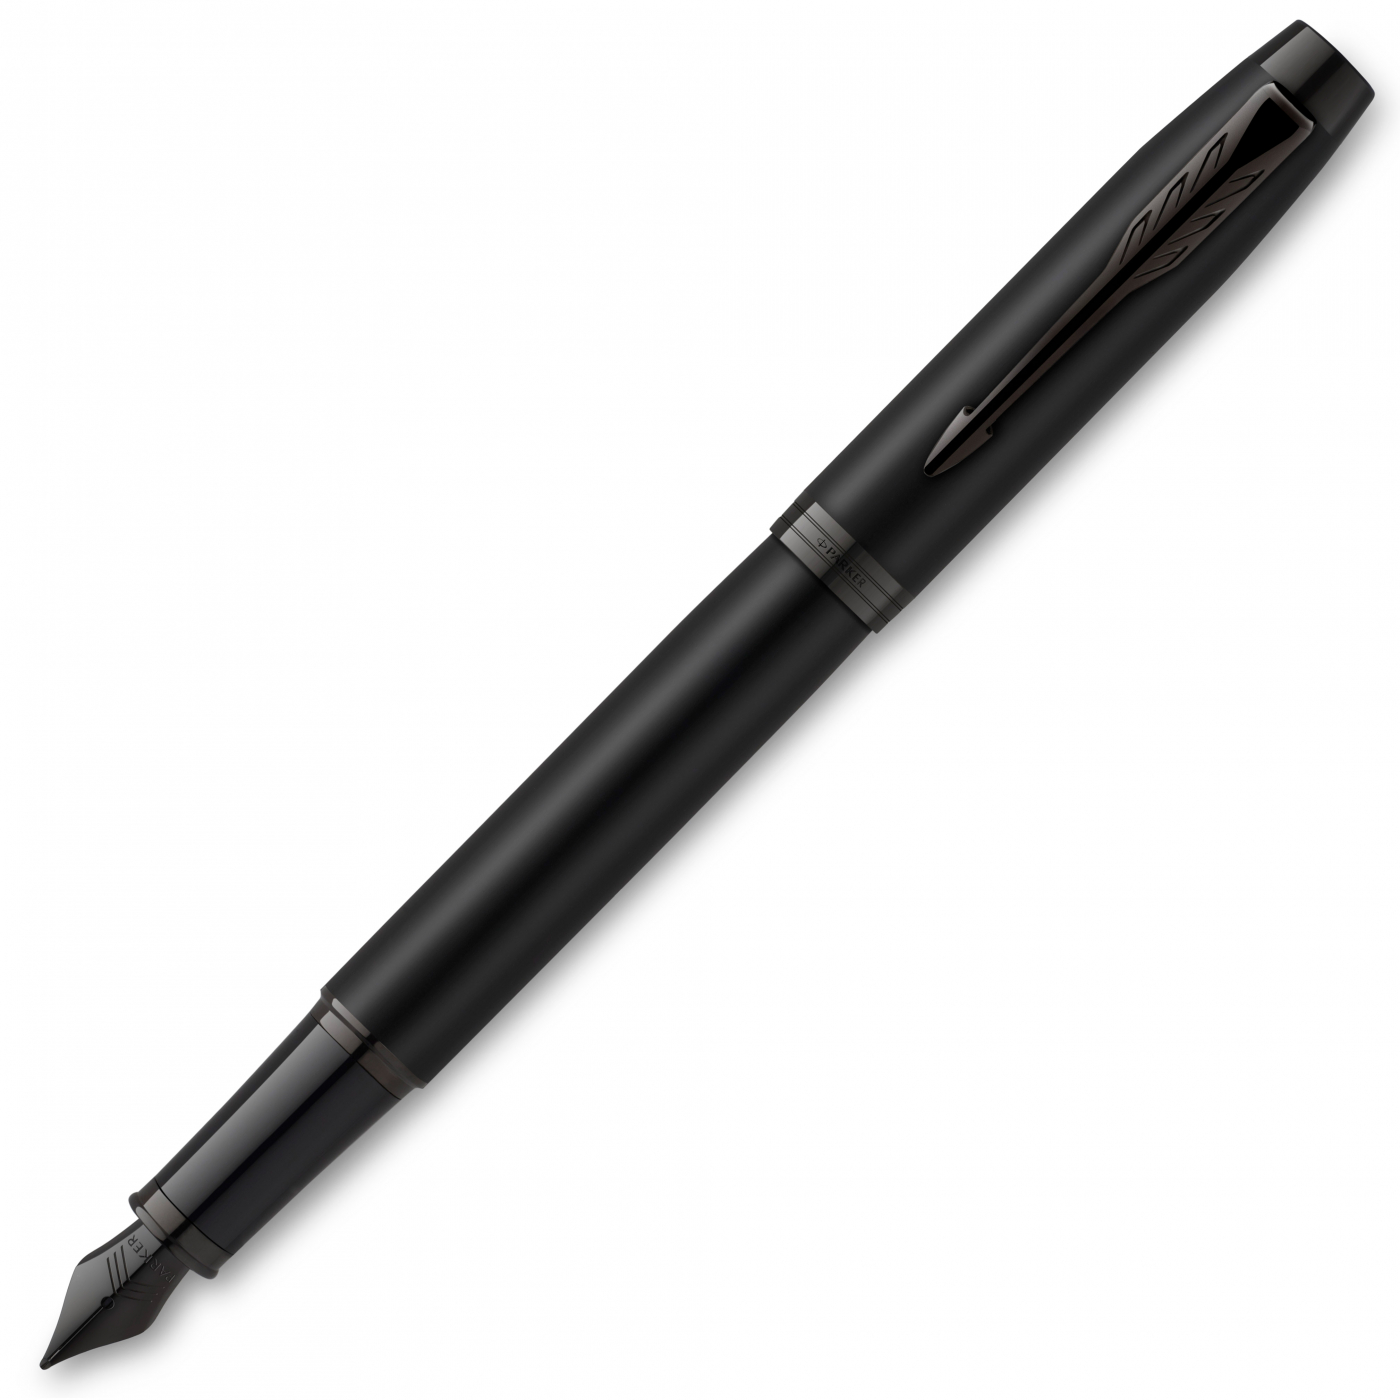 IM Achromatic Black Fountain pen in the group Pens / Fine Writing / Fountain Pens at Pen Store (111898_r)